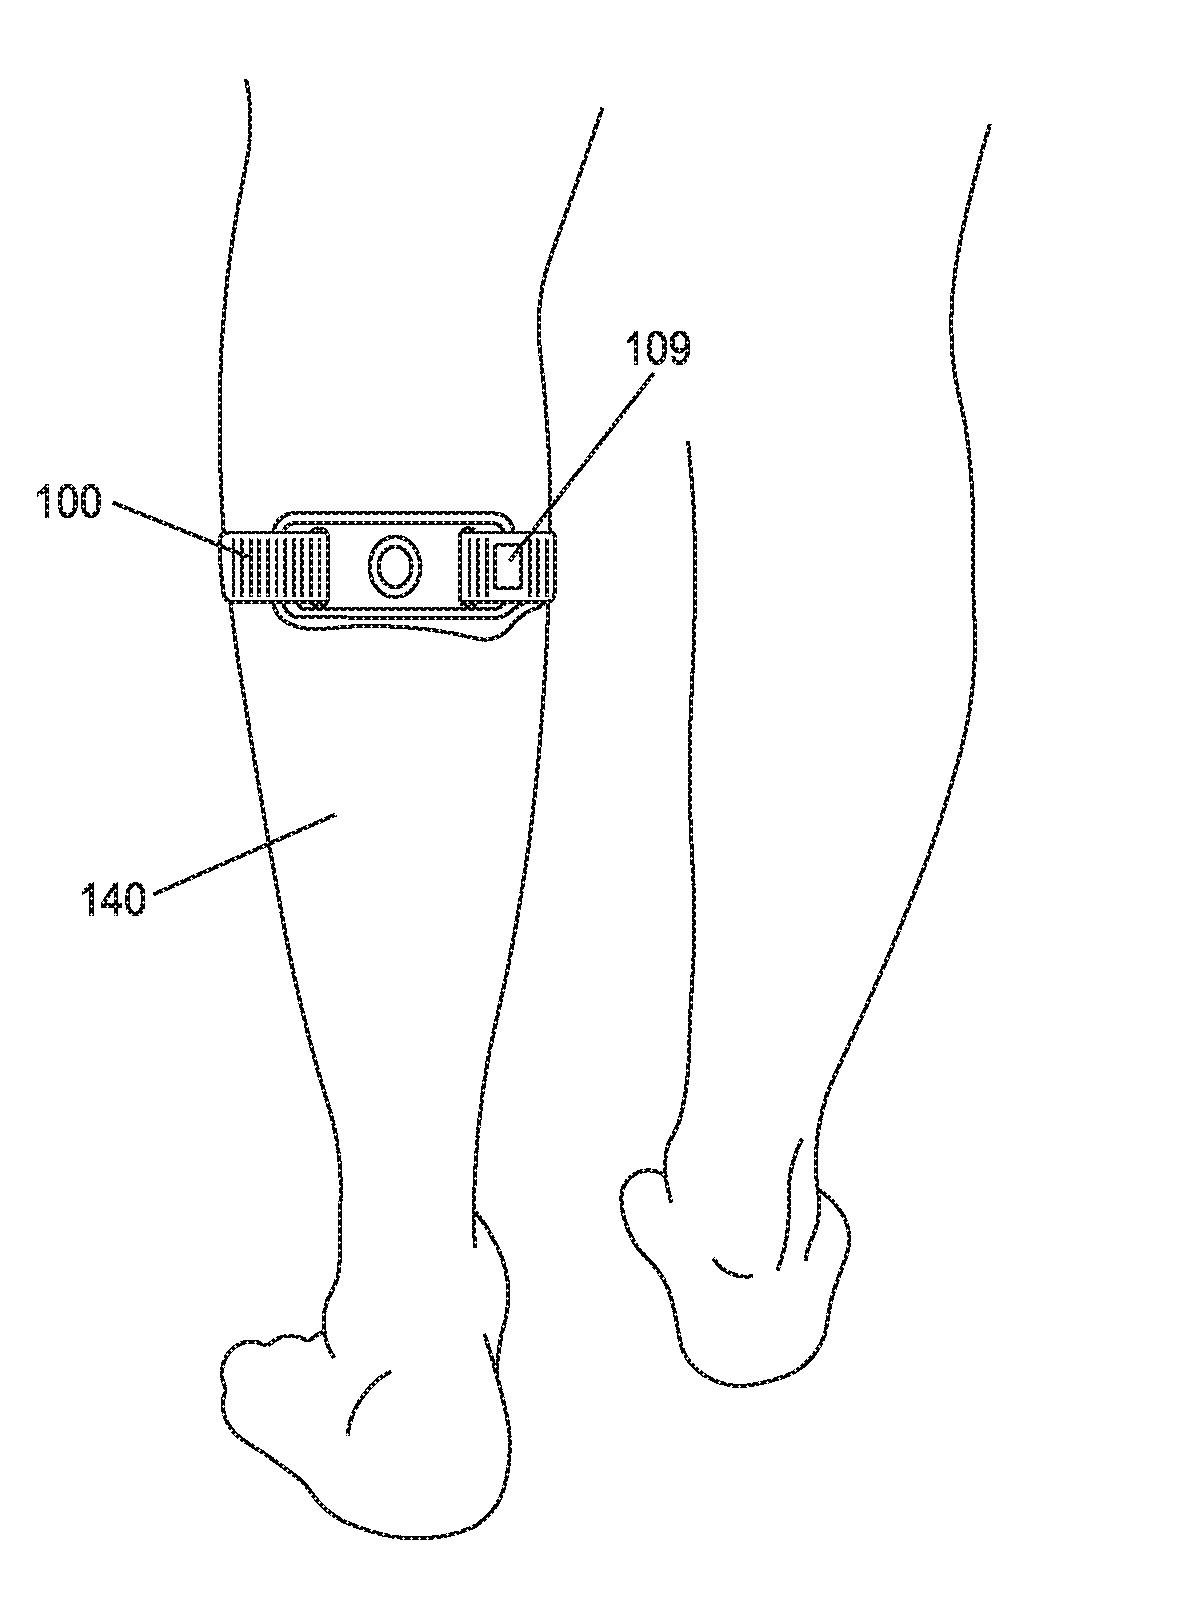 Transcutaneous electrical nerve stimulator with automatic detection of leg orientation and leg motion for enhanced sleep analysis, including enhanced transcutaneous electrical nerve stimulation (TENS) using the same